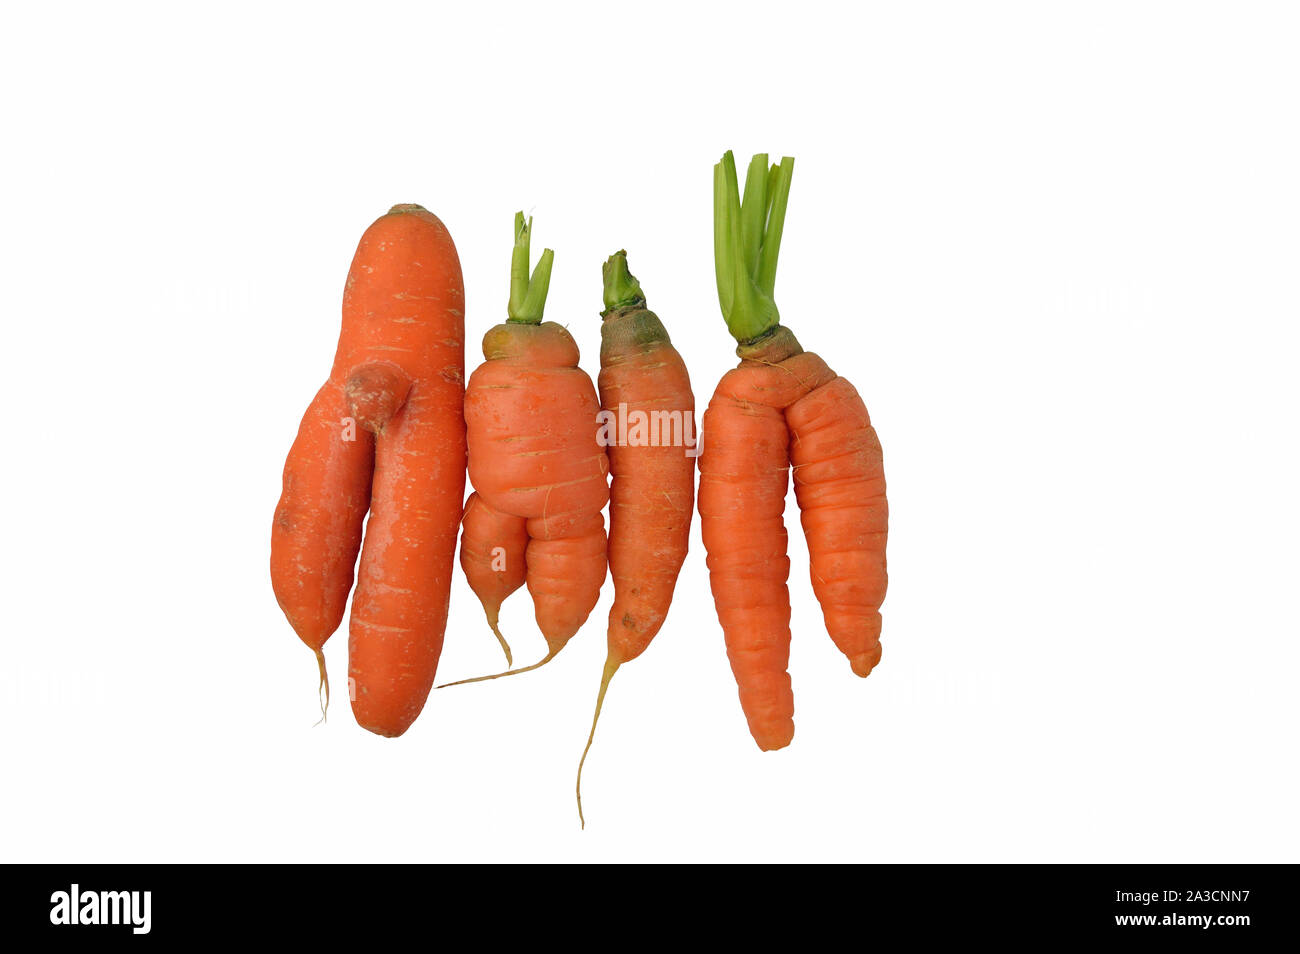 Deformed carrots isolated on white Stock Photo